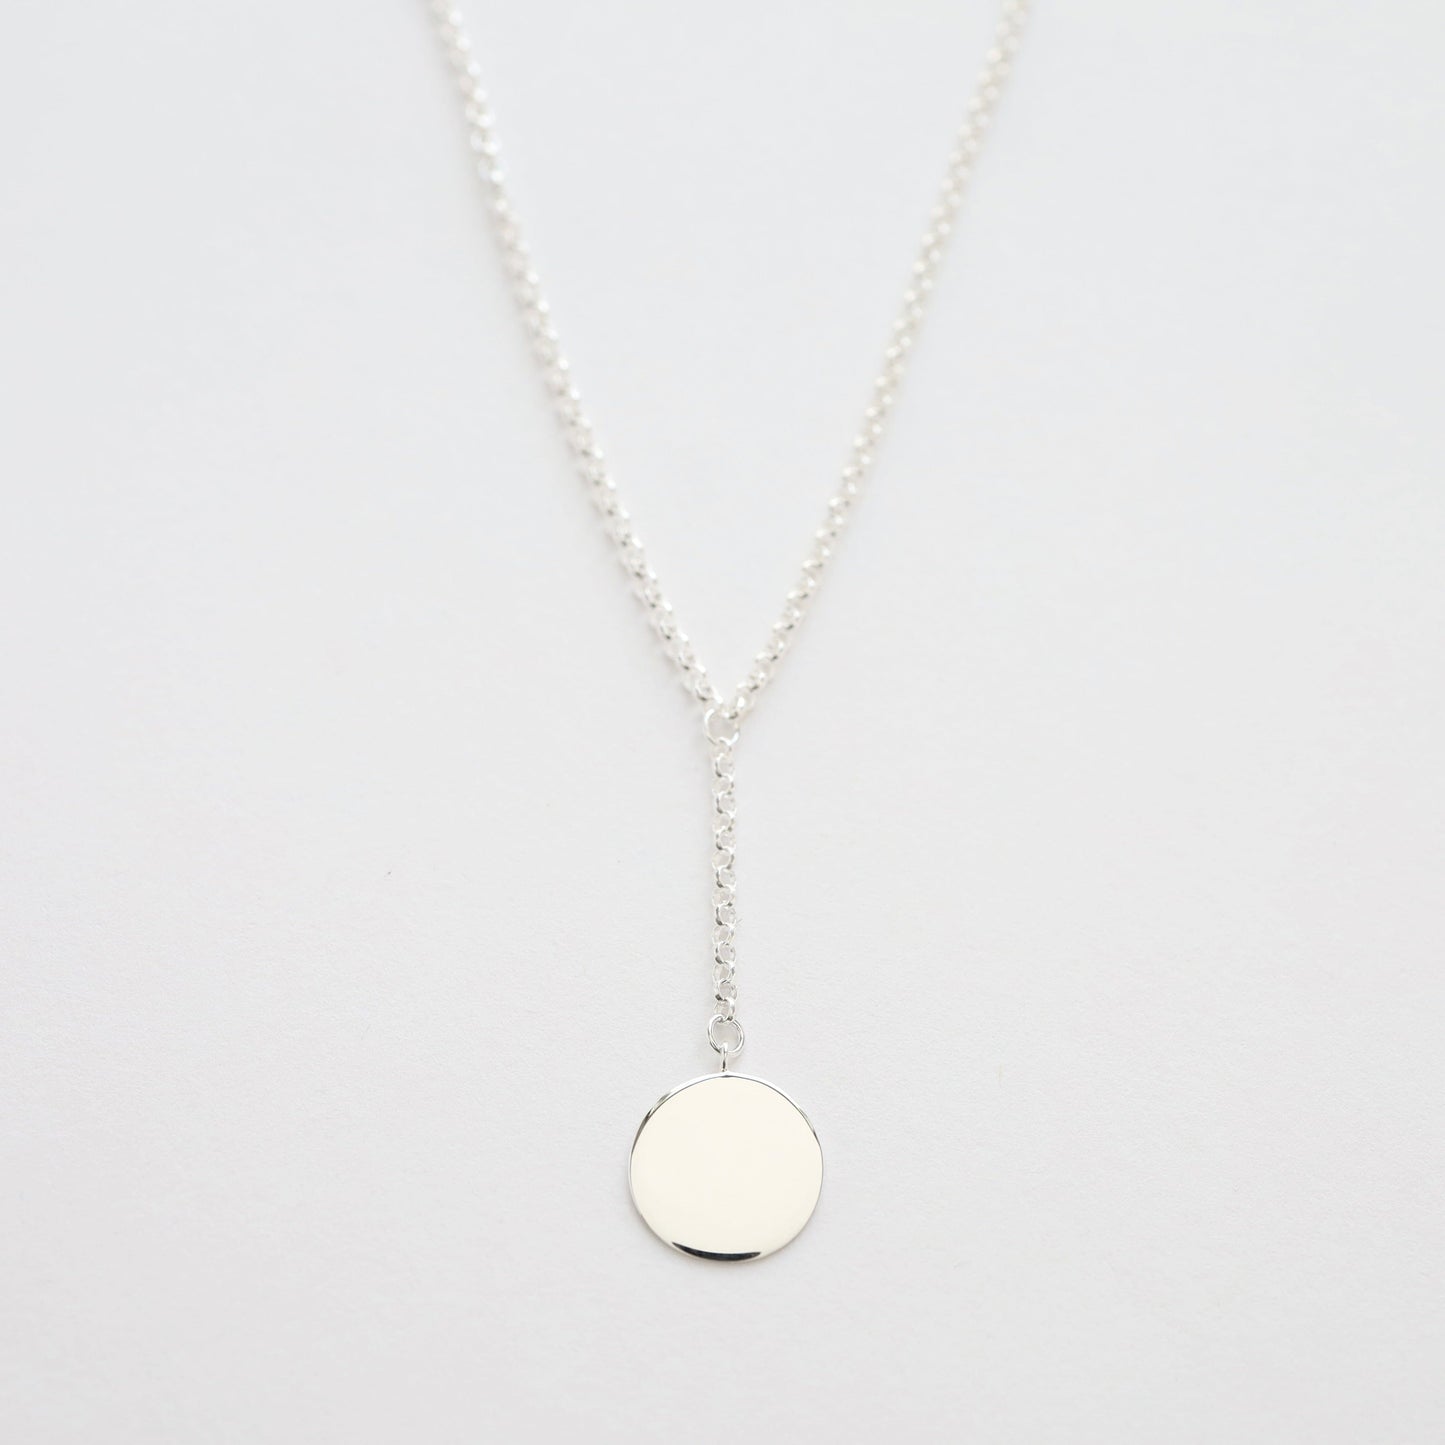 NKL Disc Drop "Y" Necklace in Sterling Silver